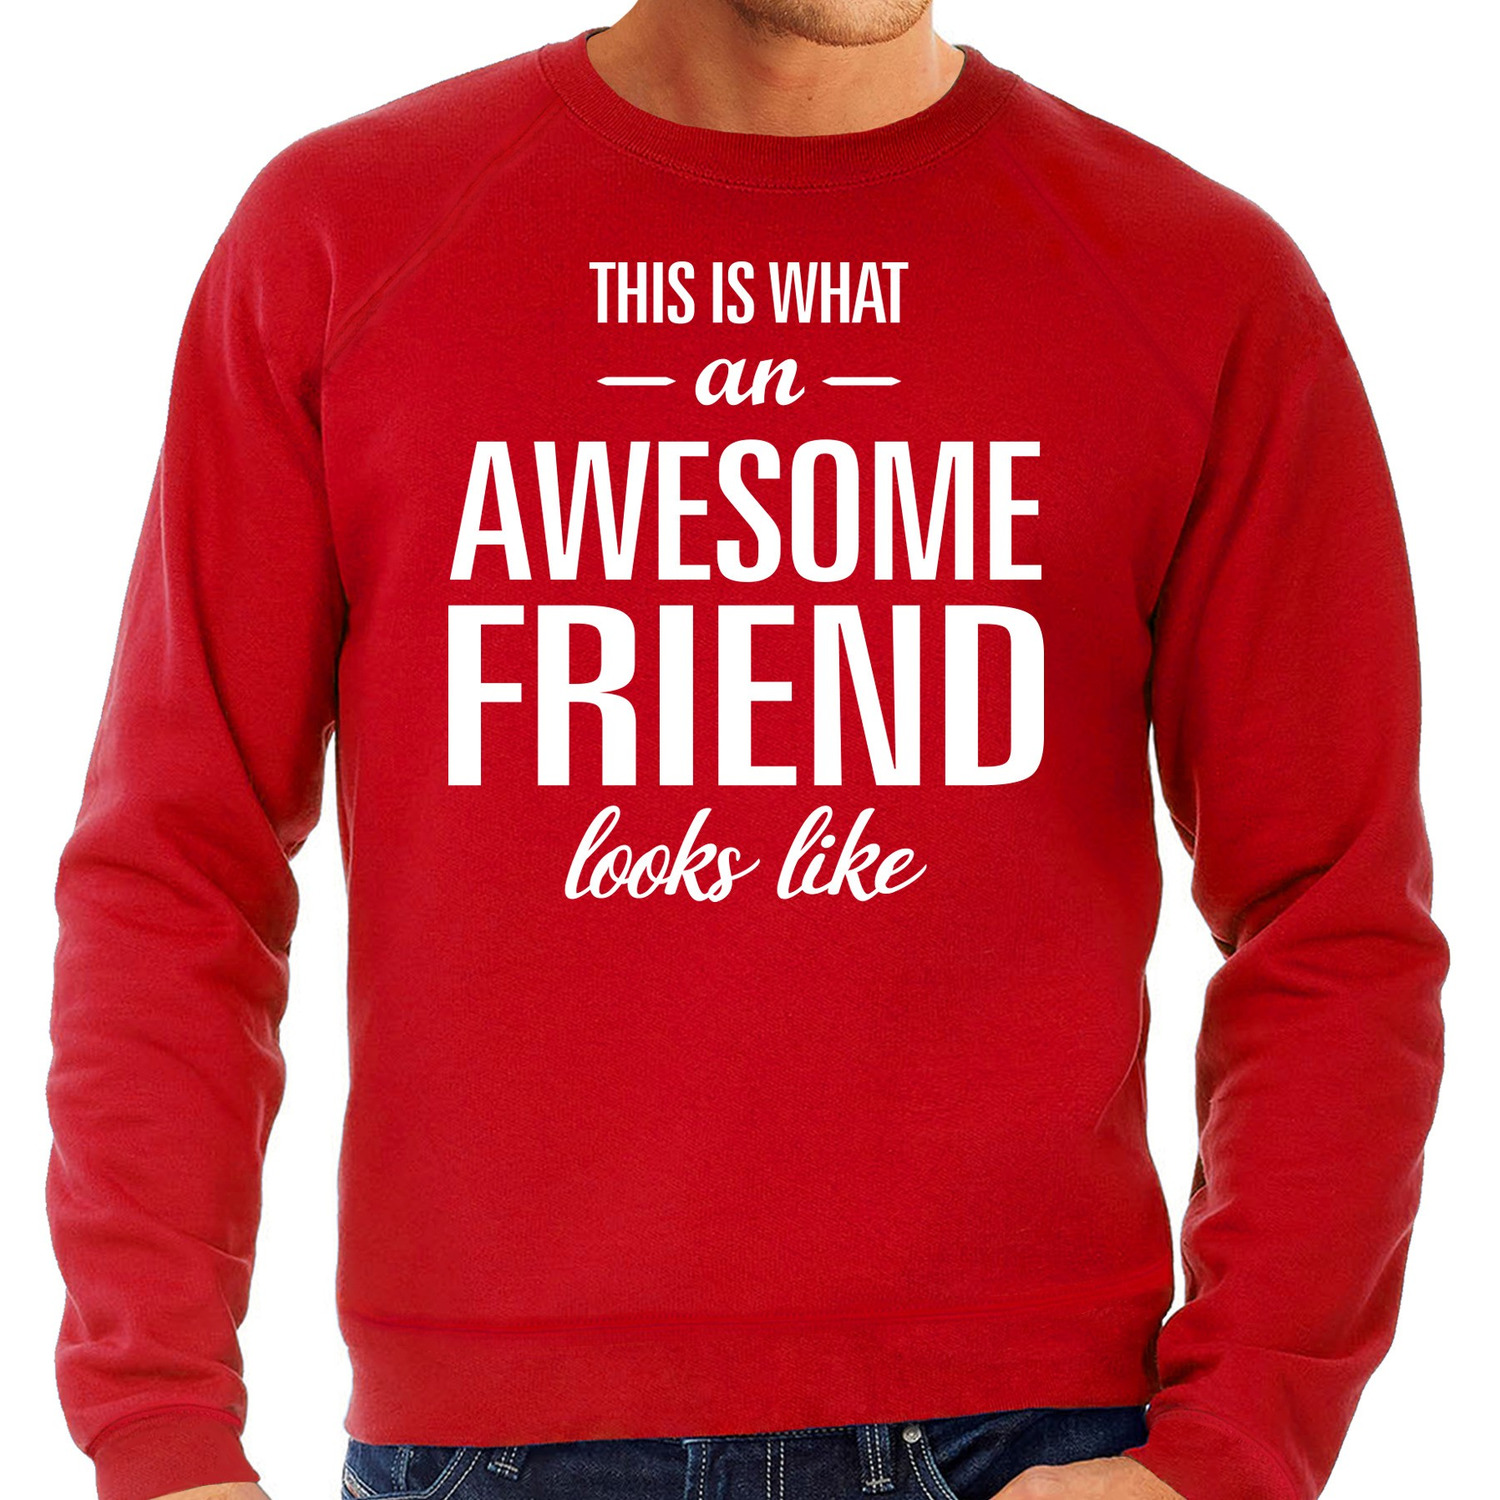 Awesome Friend-vriend kado sweater rood voor heren